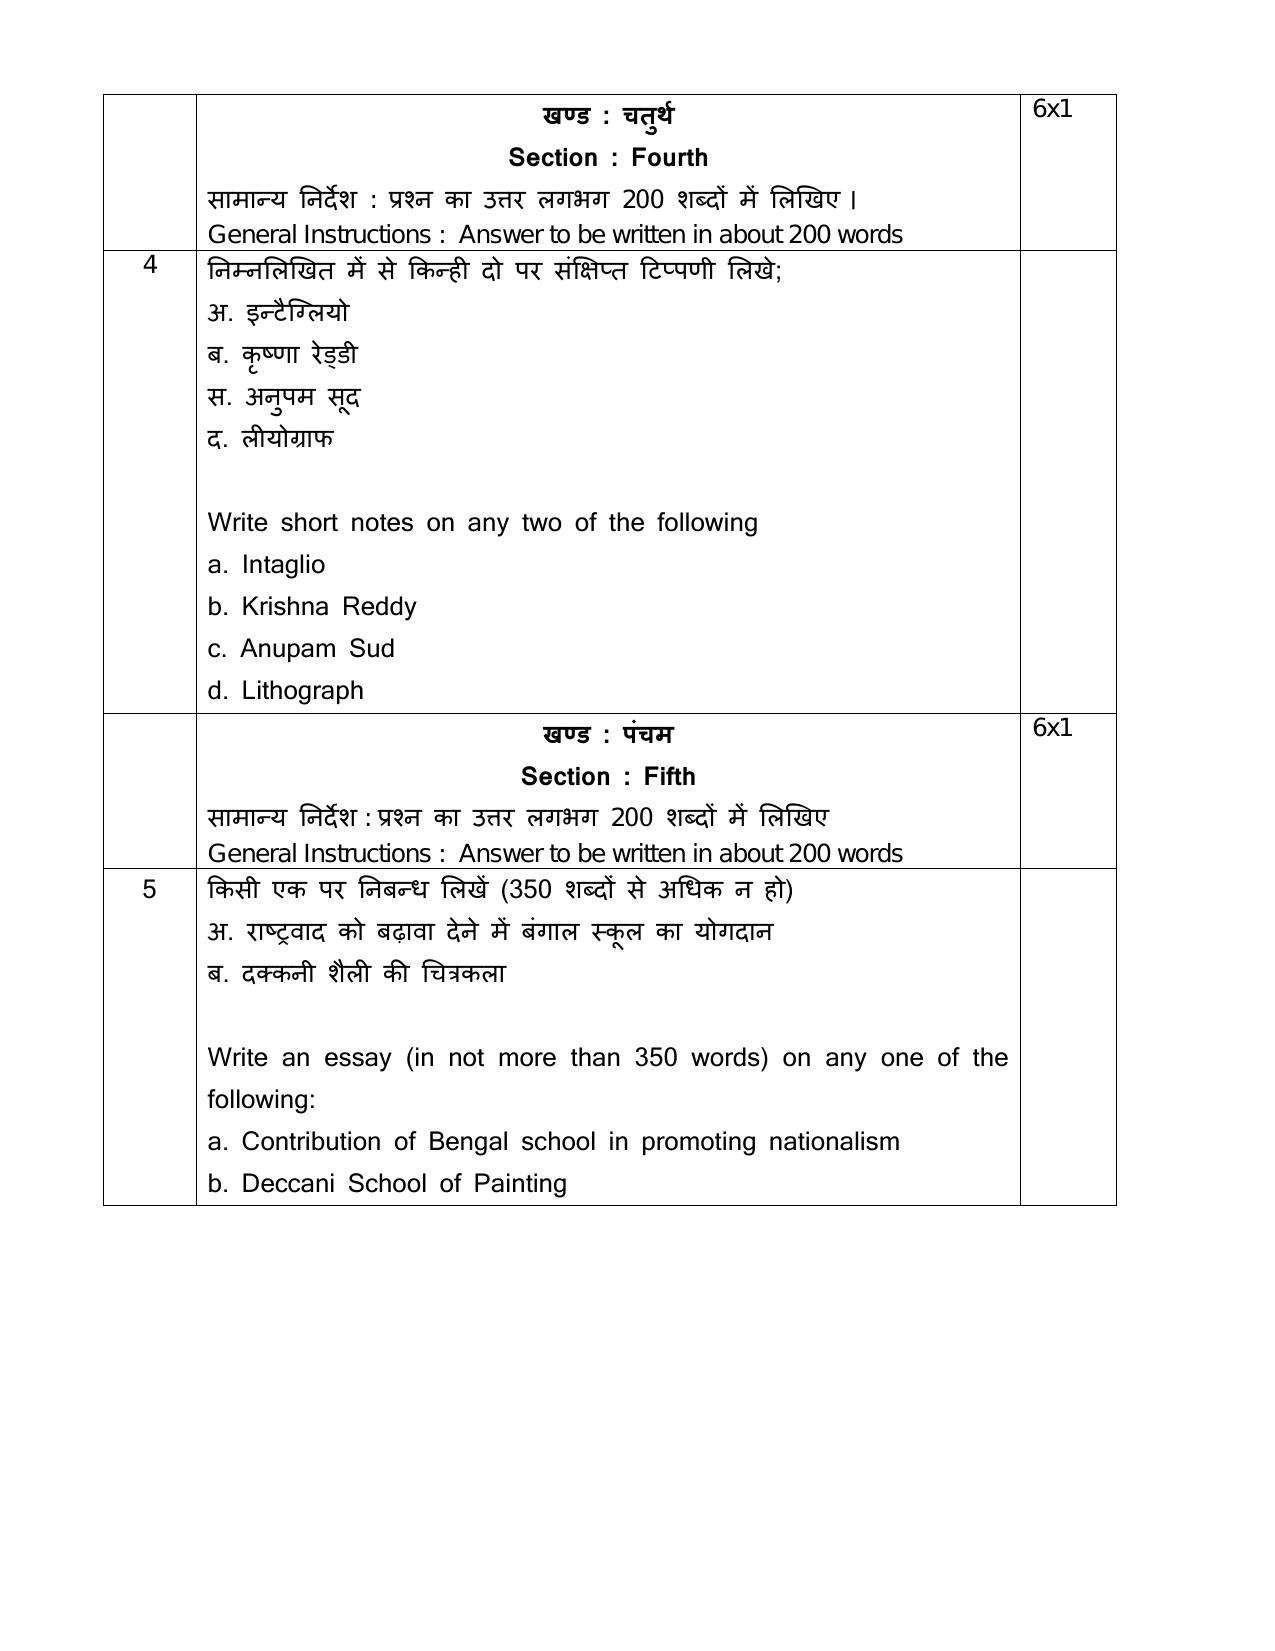 CBSE Class 12 Graphic -Sample Paper 2019-20 - Page 5